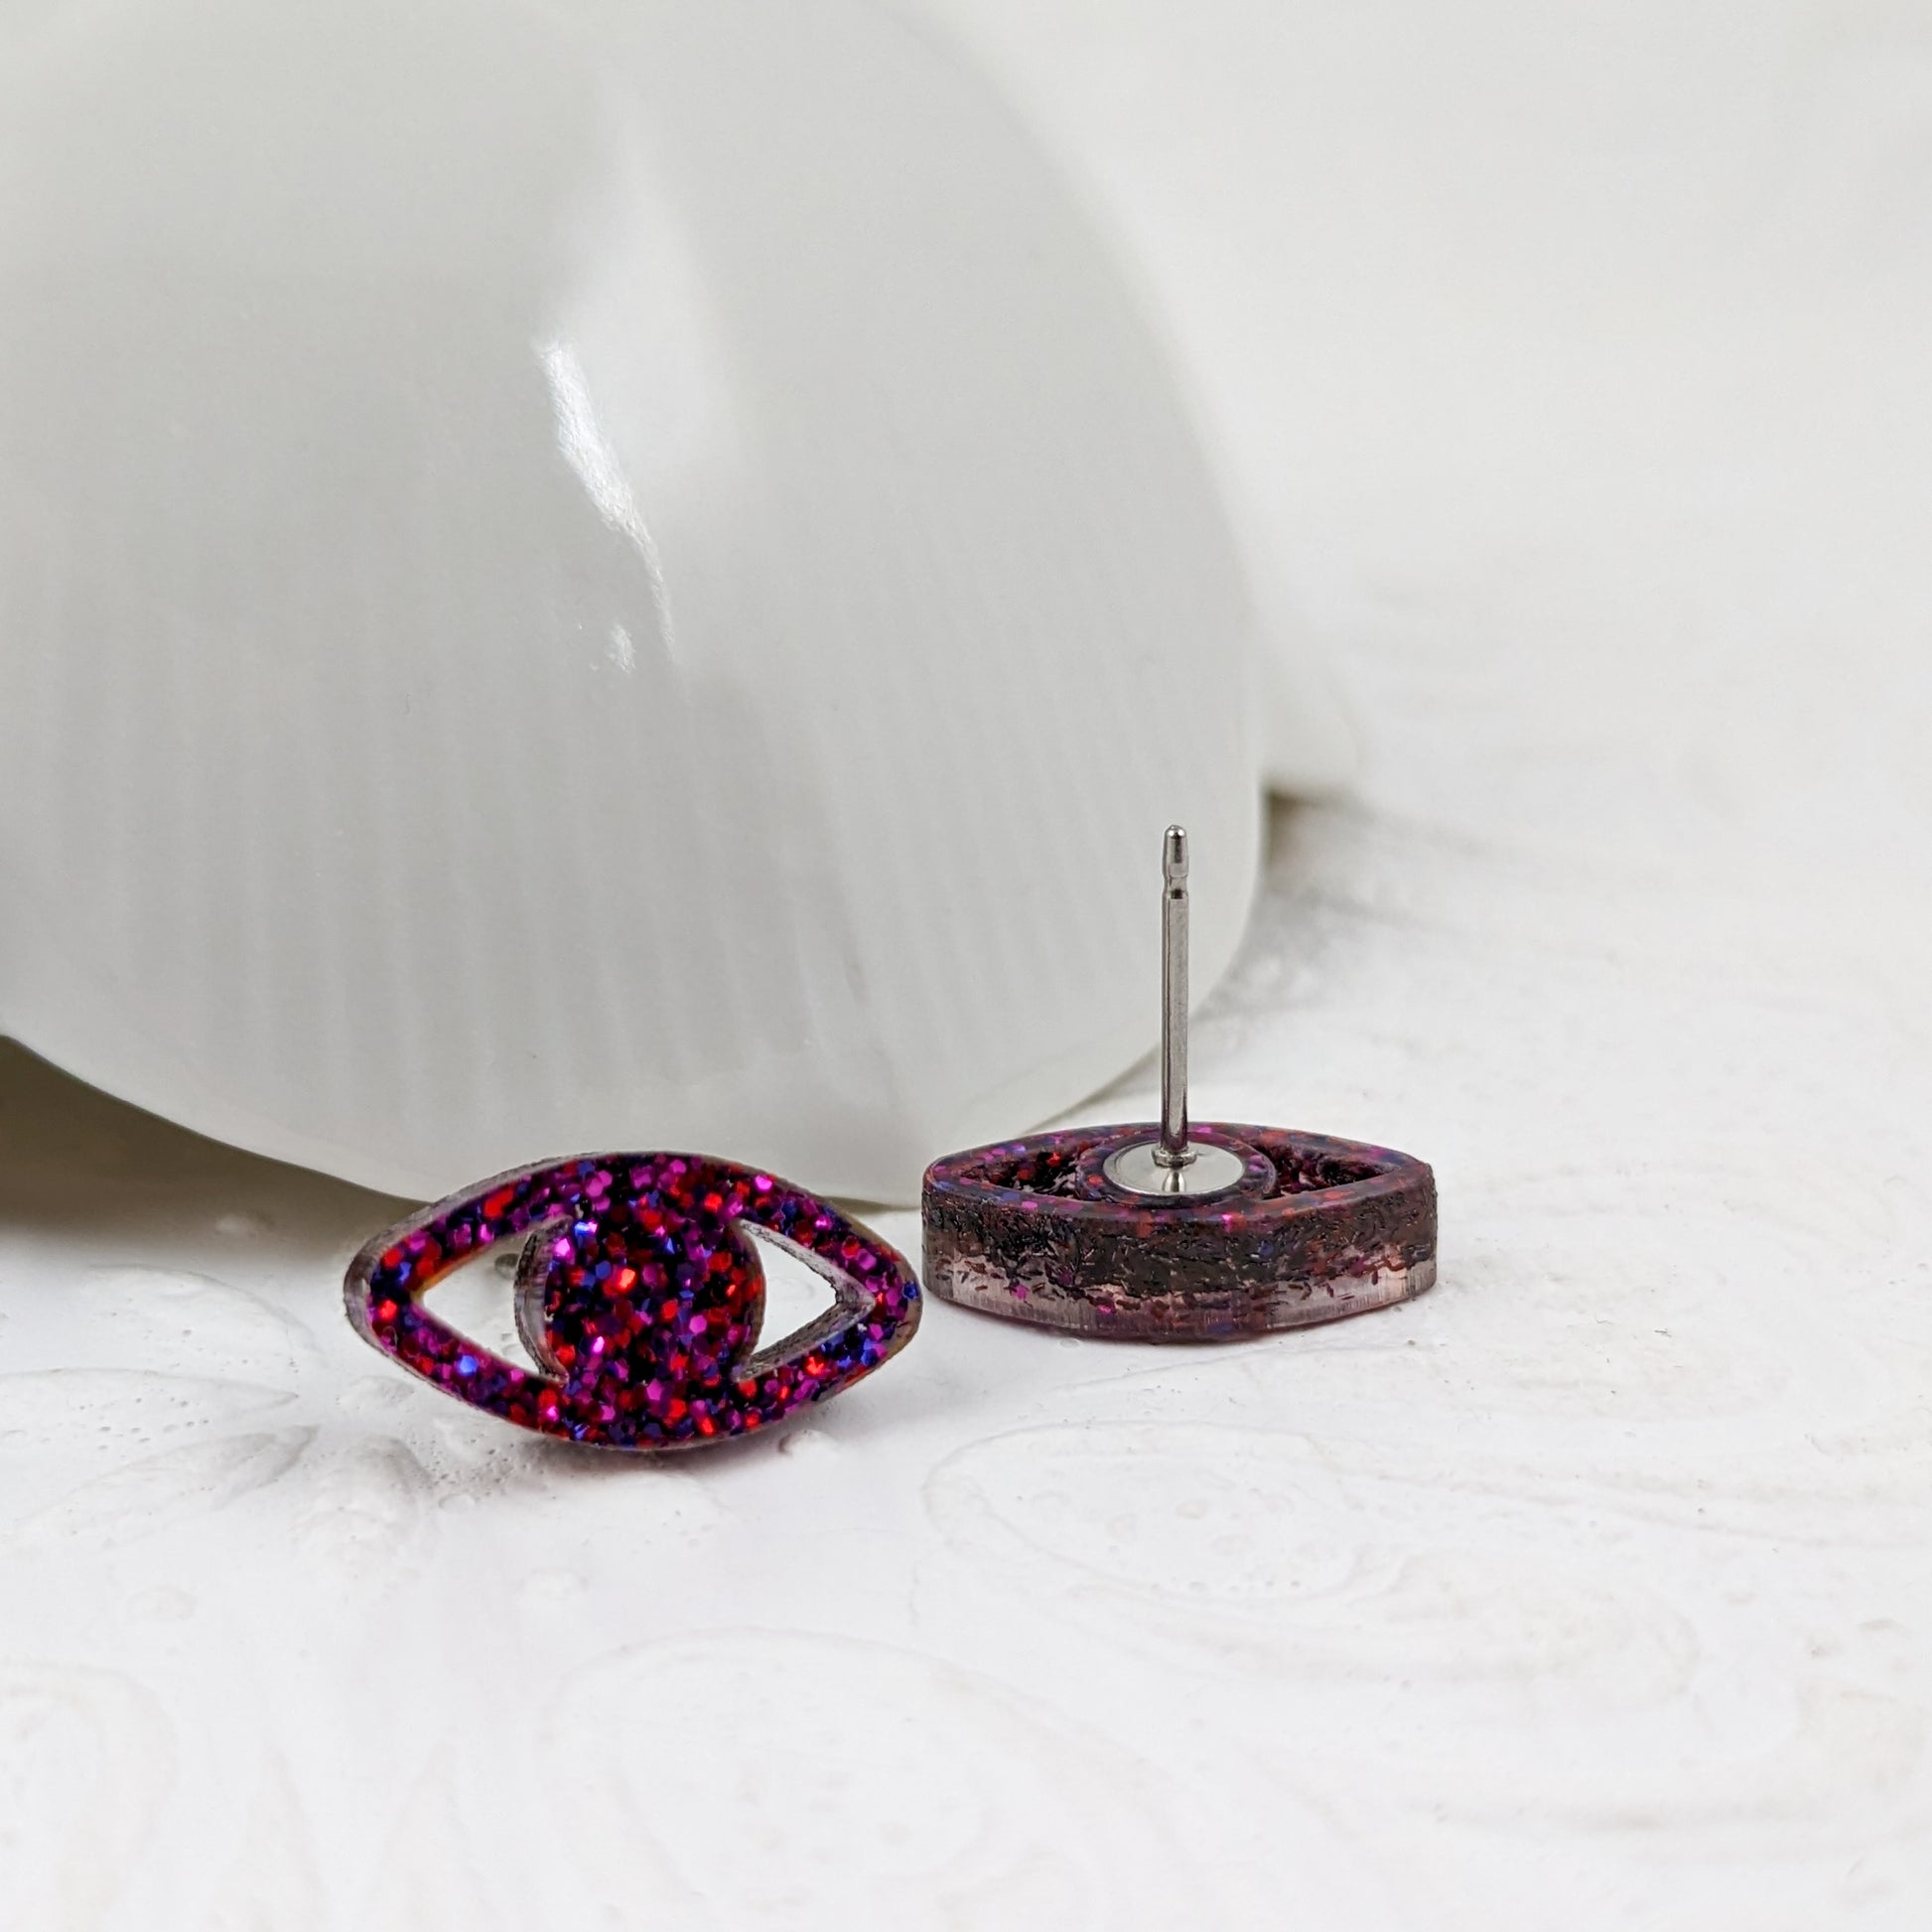 Peepers - Eye shaped stud earrings made with ruby sparkle acrylic and stainless steel posts in front of a vintage white dish